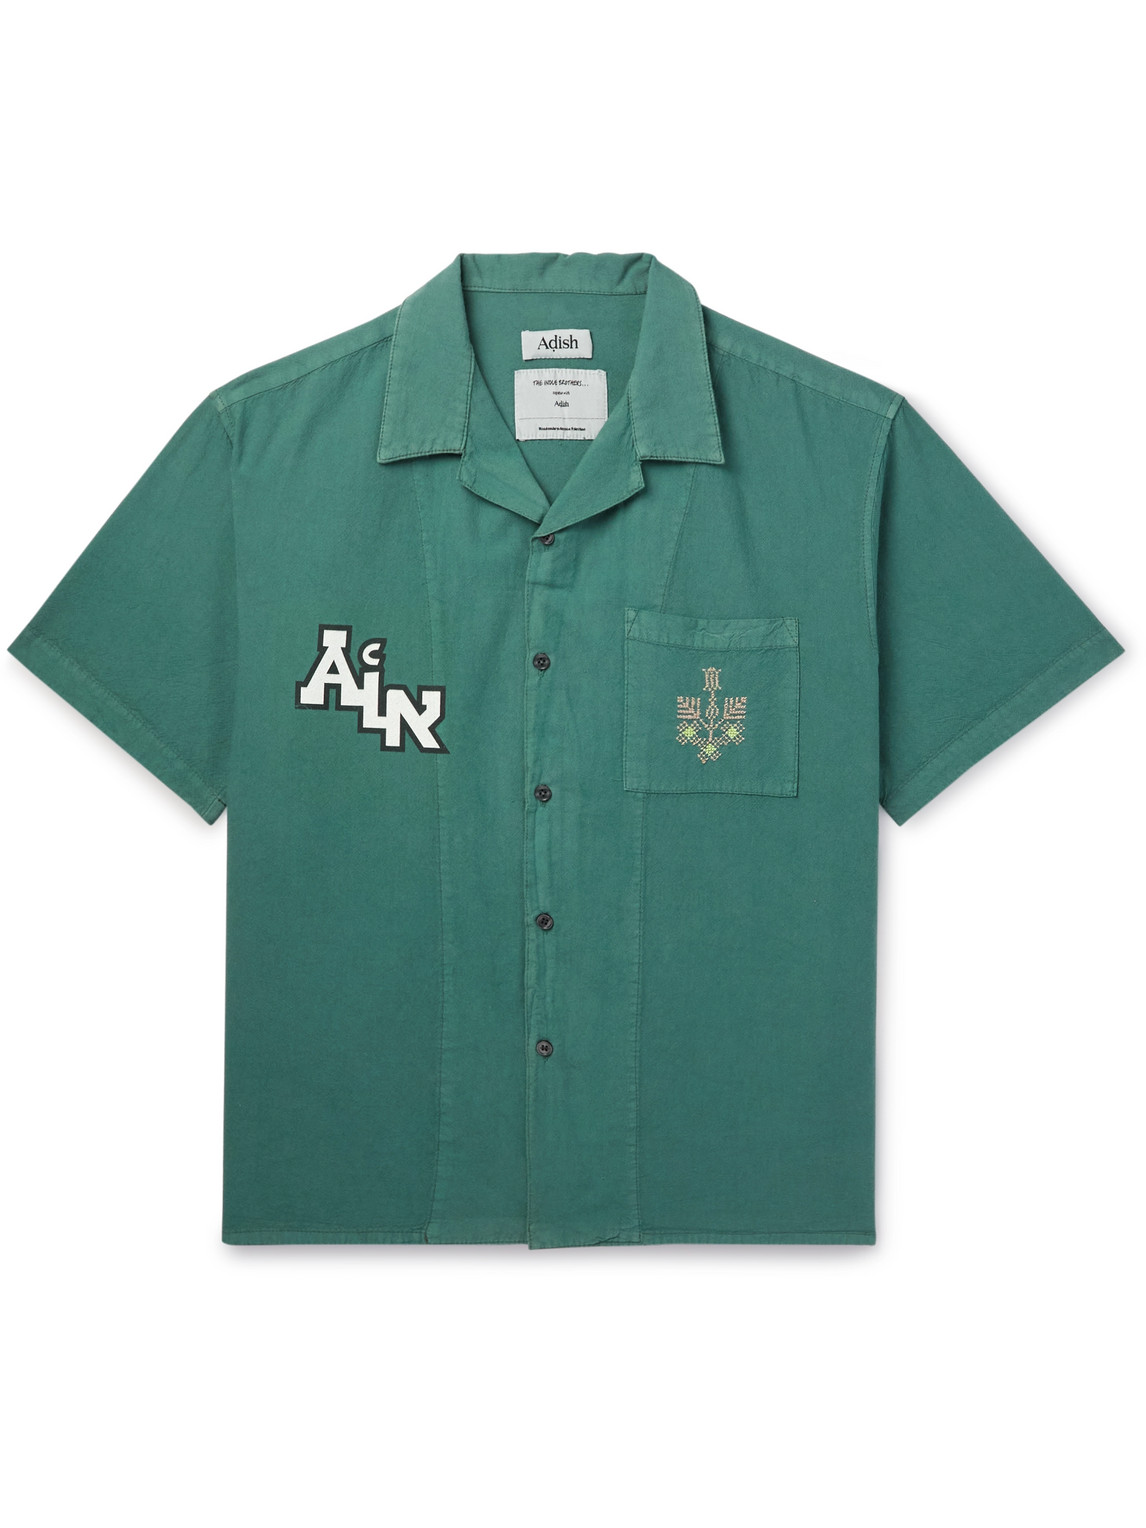 Adish The Inoue Brothers Camp-collar Logo-detailed Garment-dyed Cotton Shirt In Green